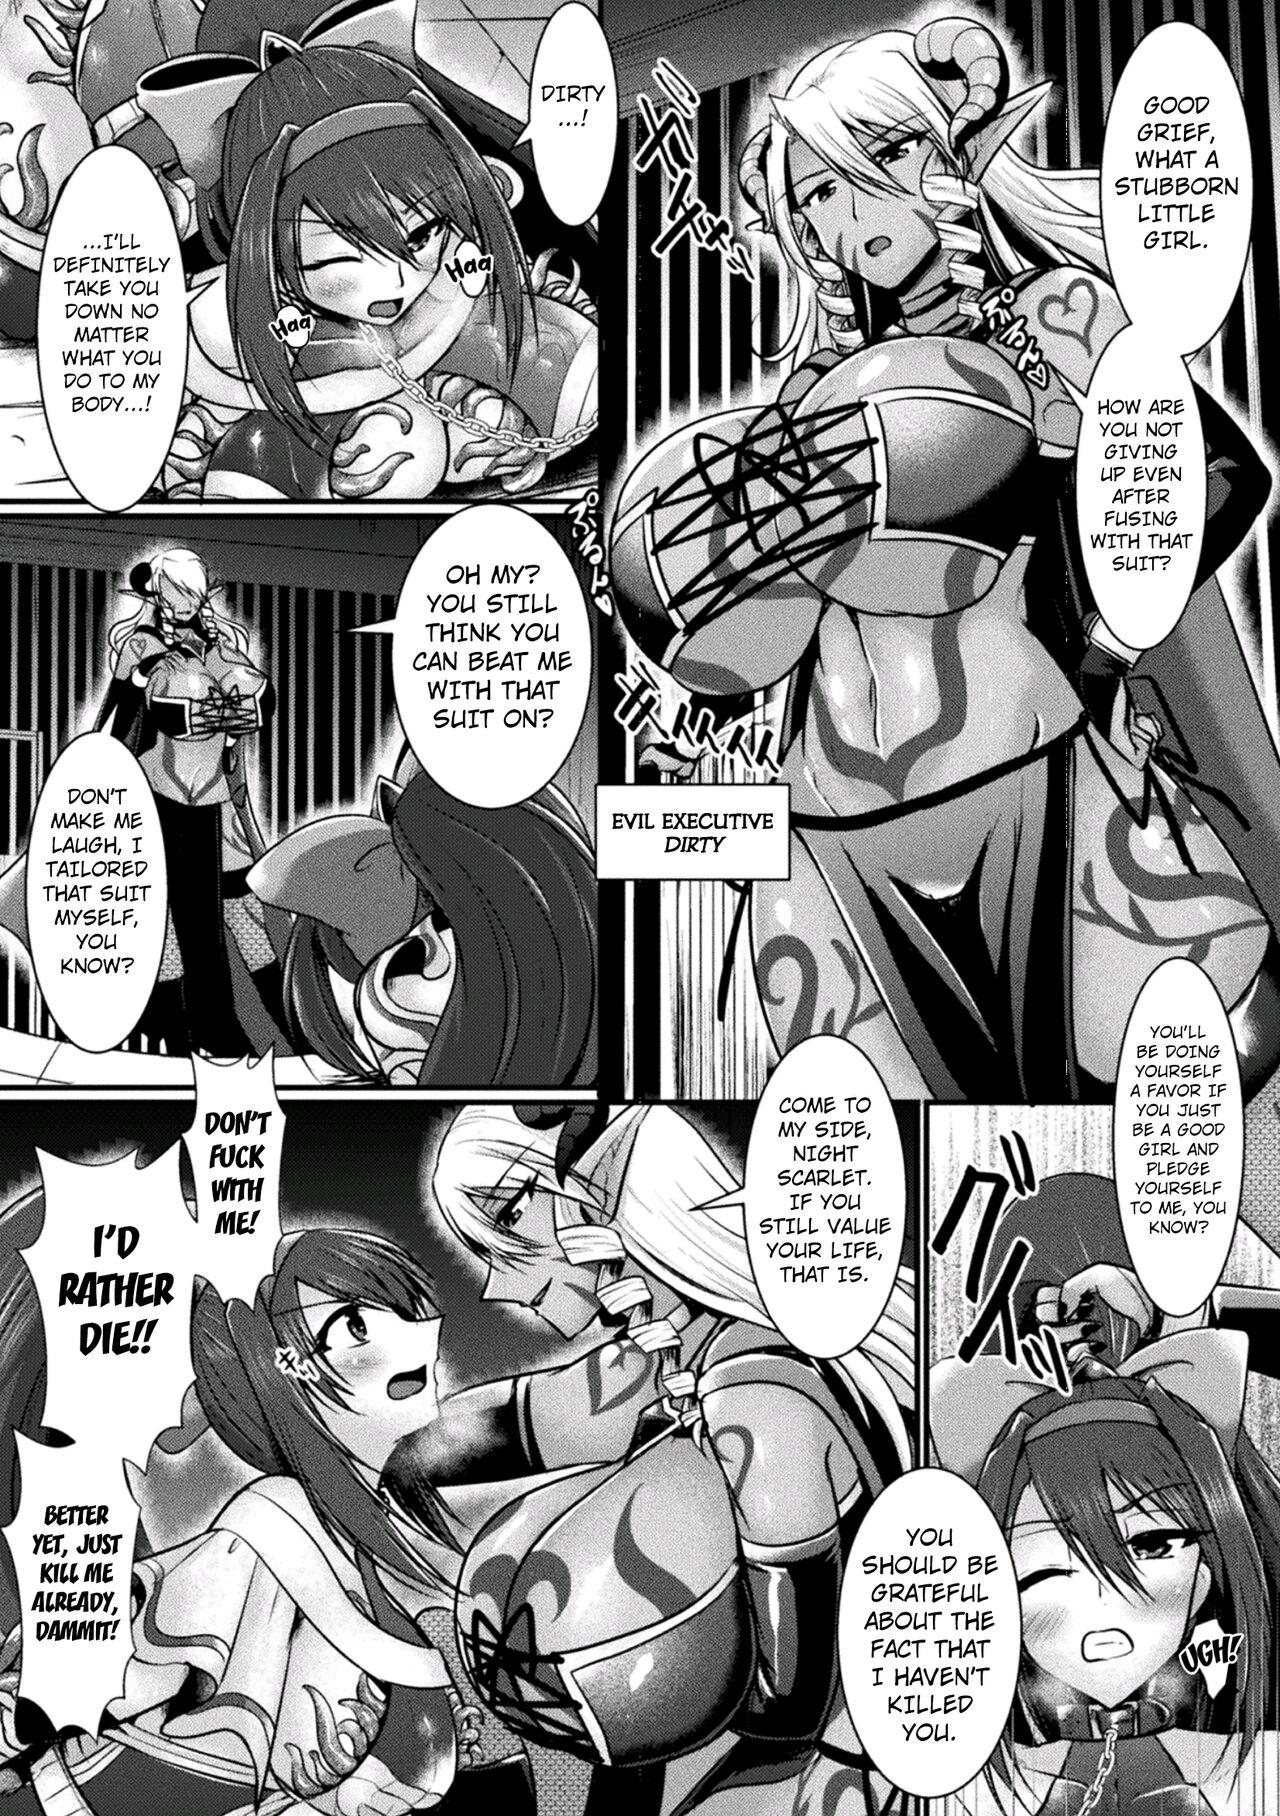 Uncut Yoru no Onna Kenshi Night Scarlet | The Fist Fighter Night Scarlet 2 Free Blowjob Porn - Page 3